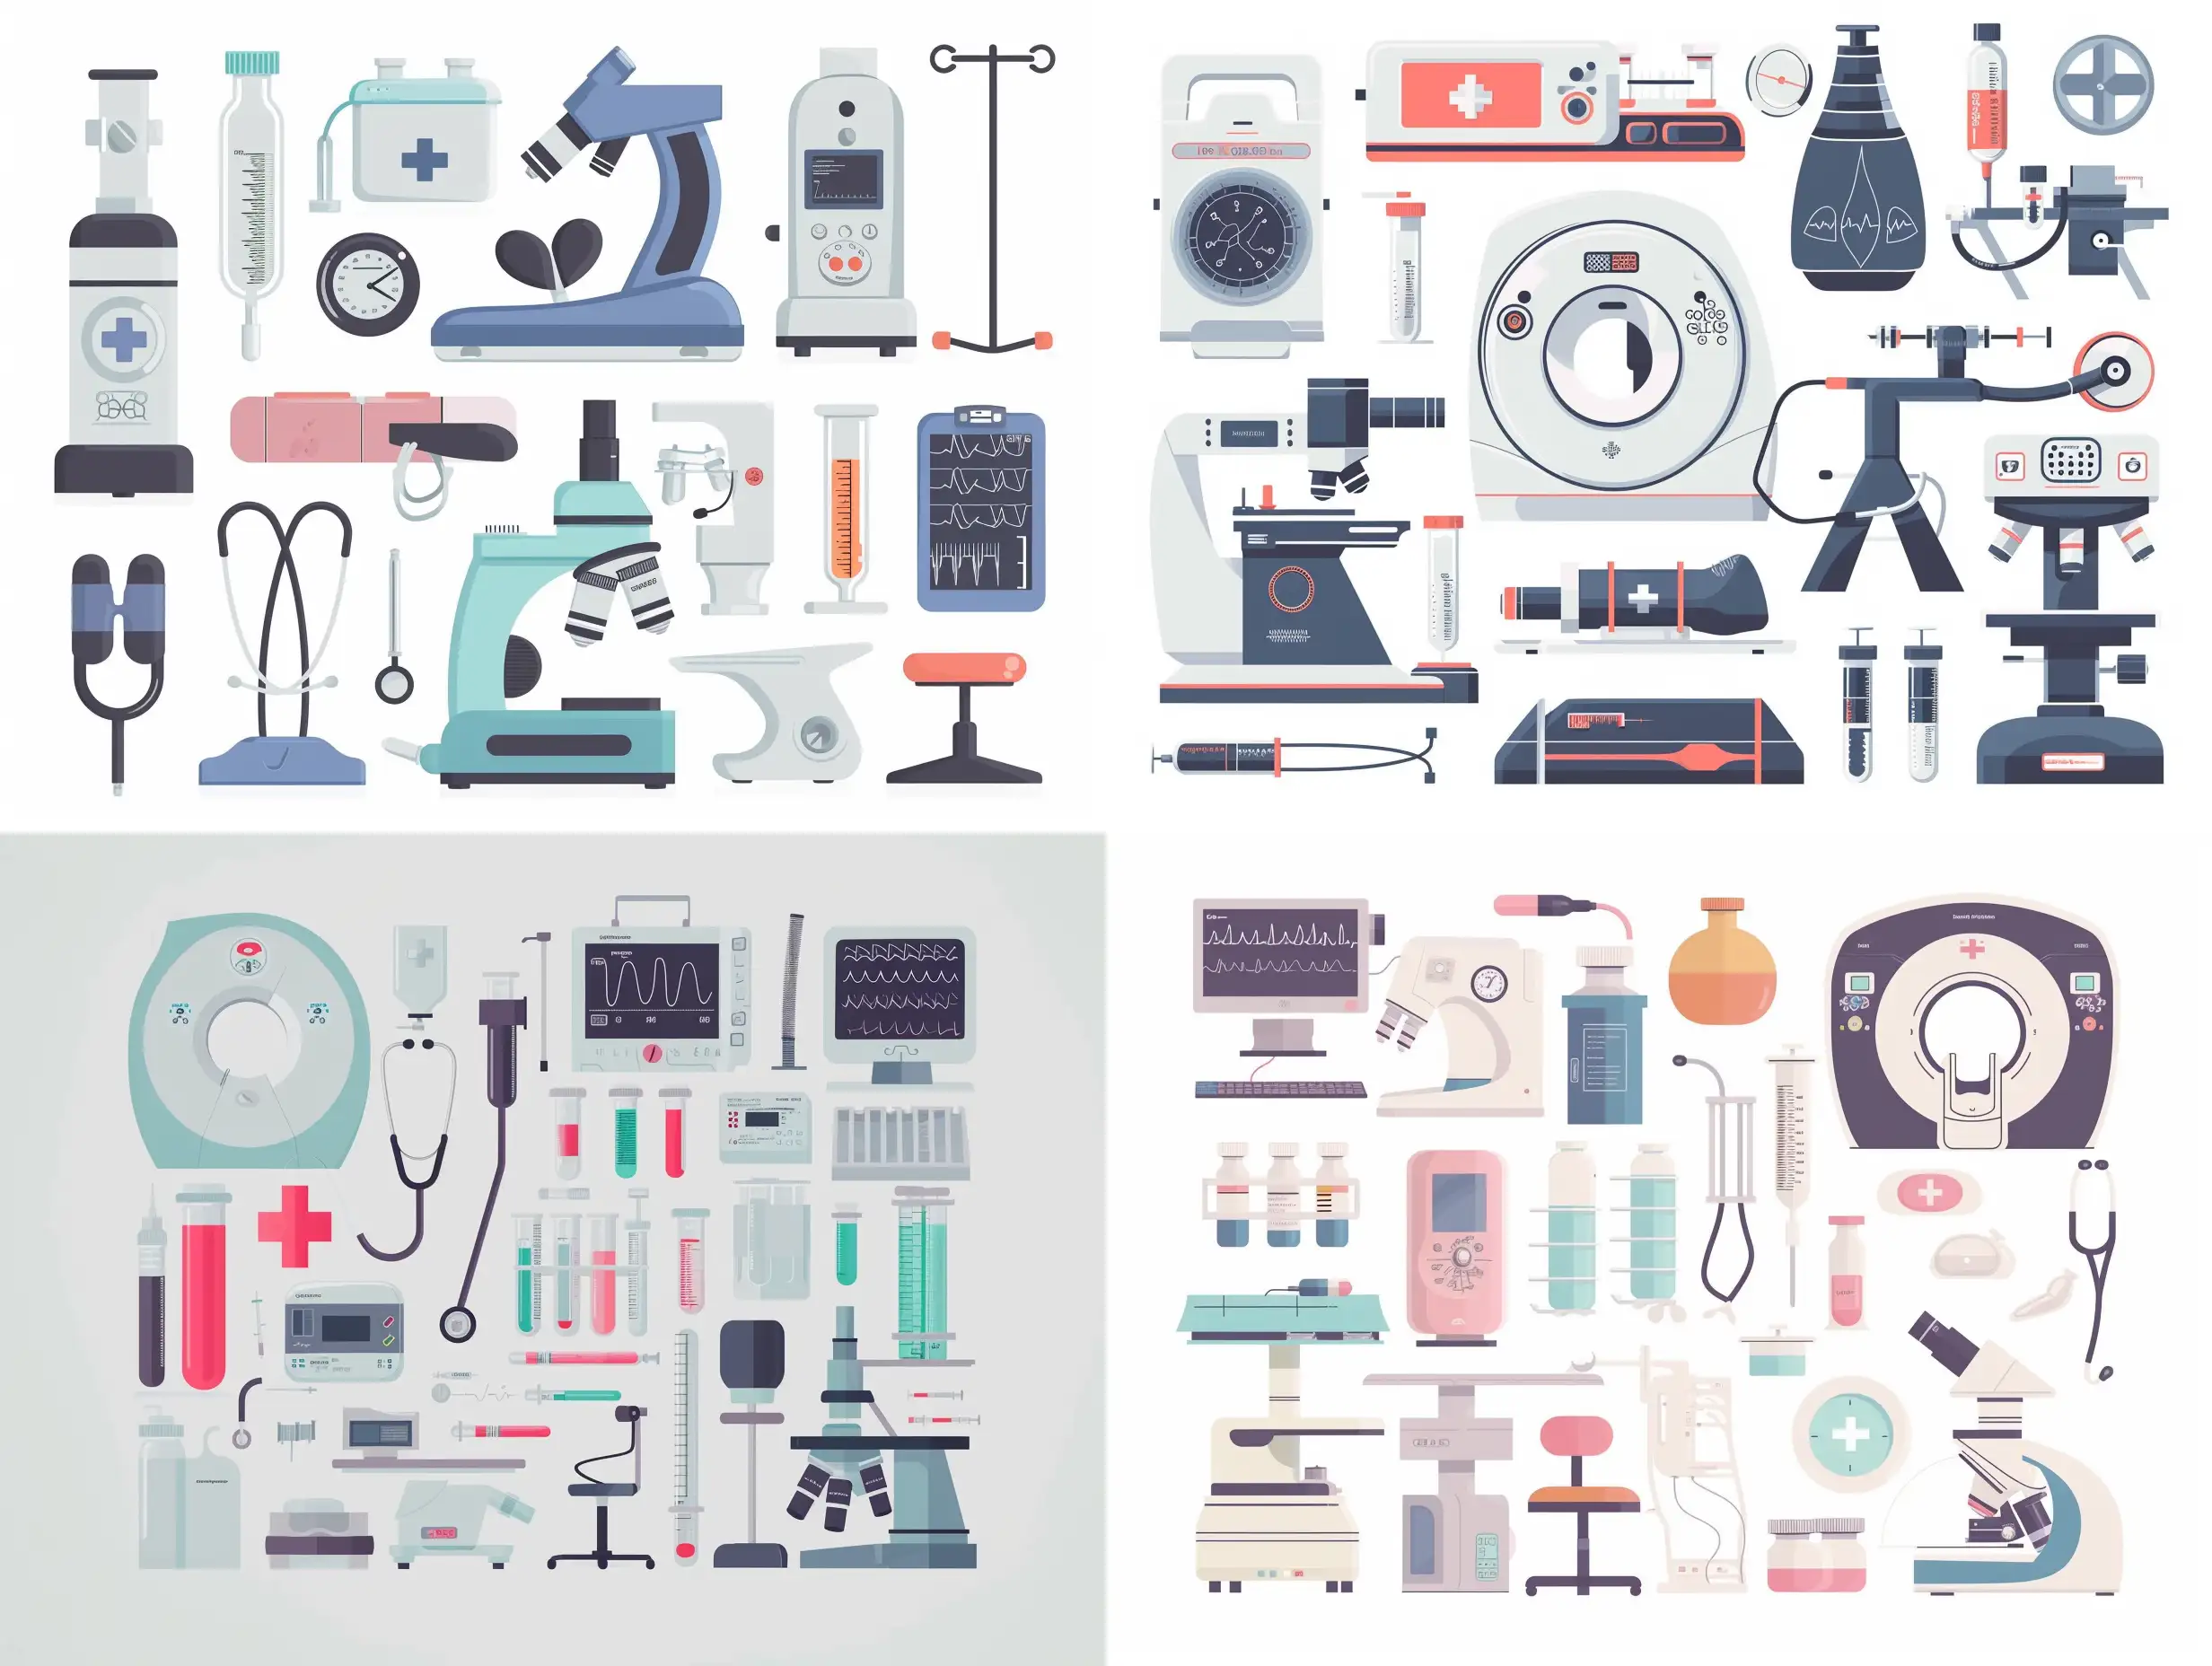 Organized-Medical-Equipment-Illustration-for-Research-and-Diagnosis